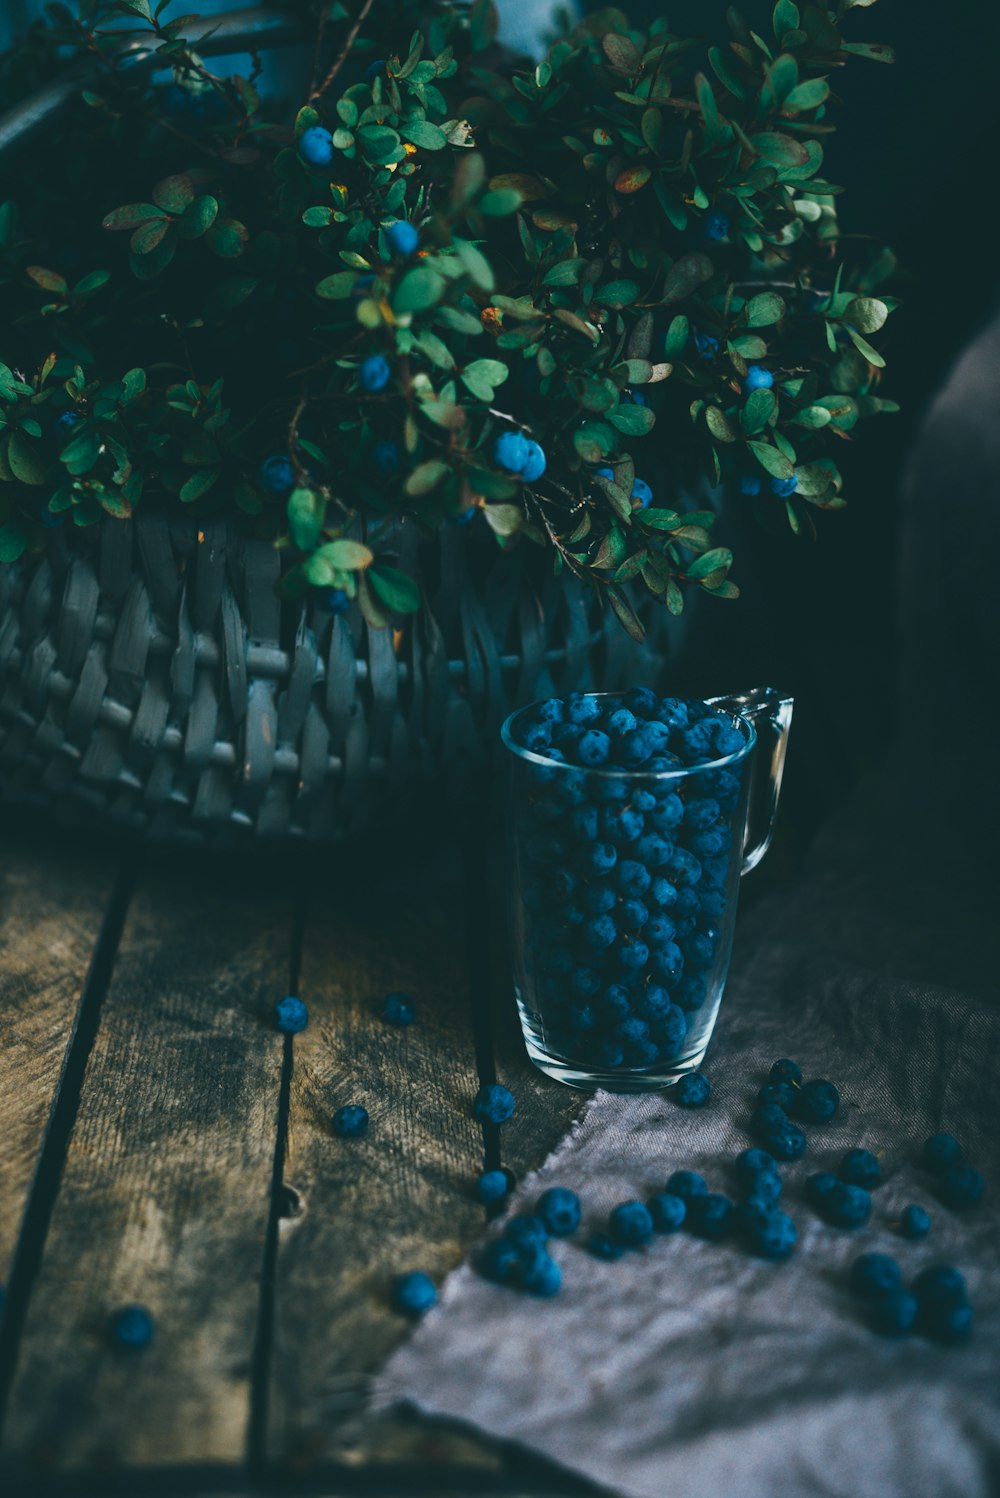 a glass filled with blue berries next to a potted plant